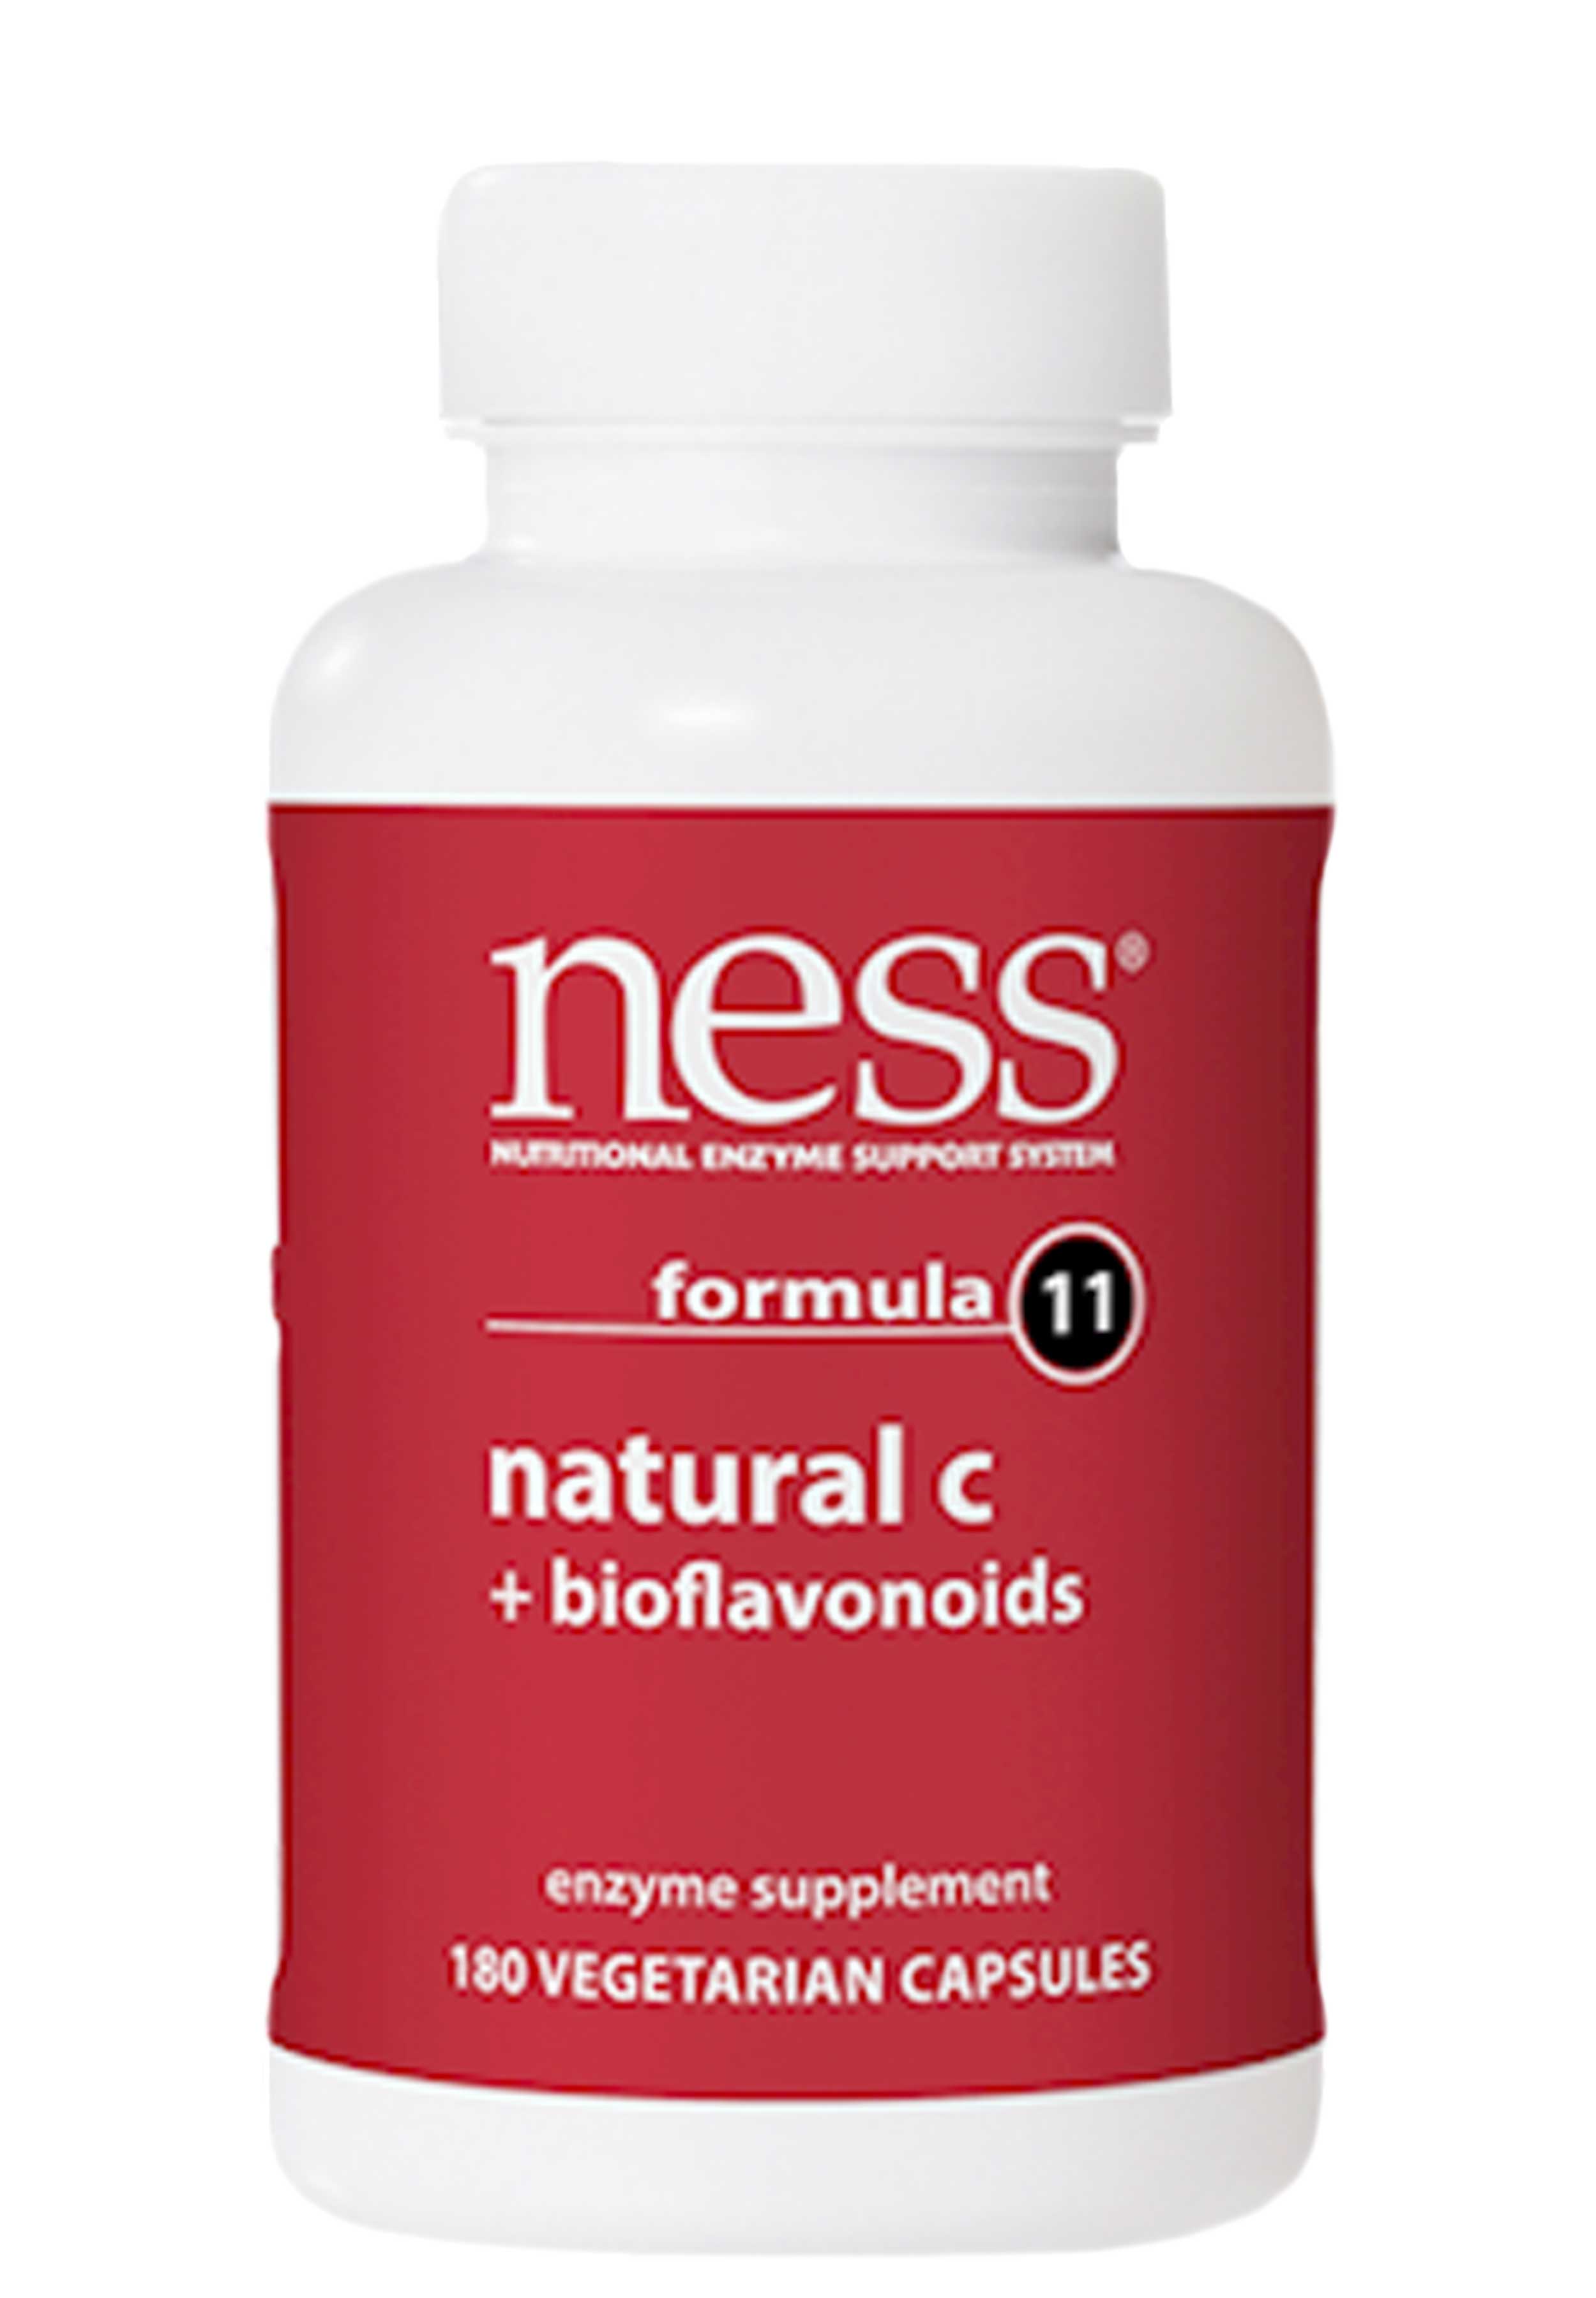 Ness Enzymes Natural C formula 11